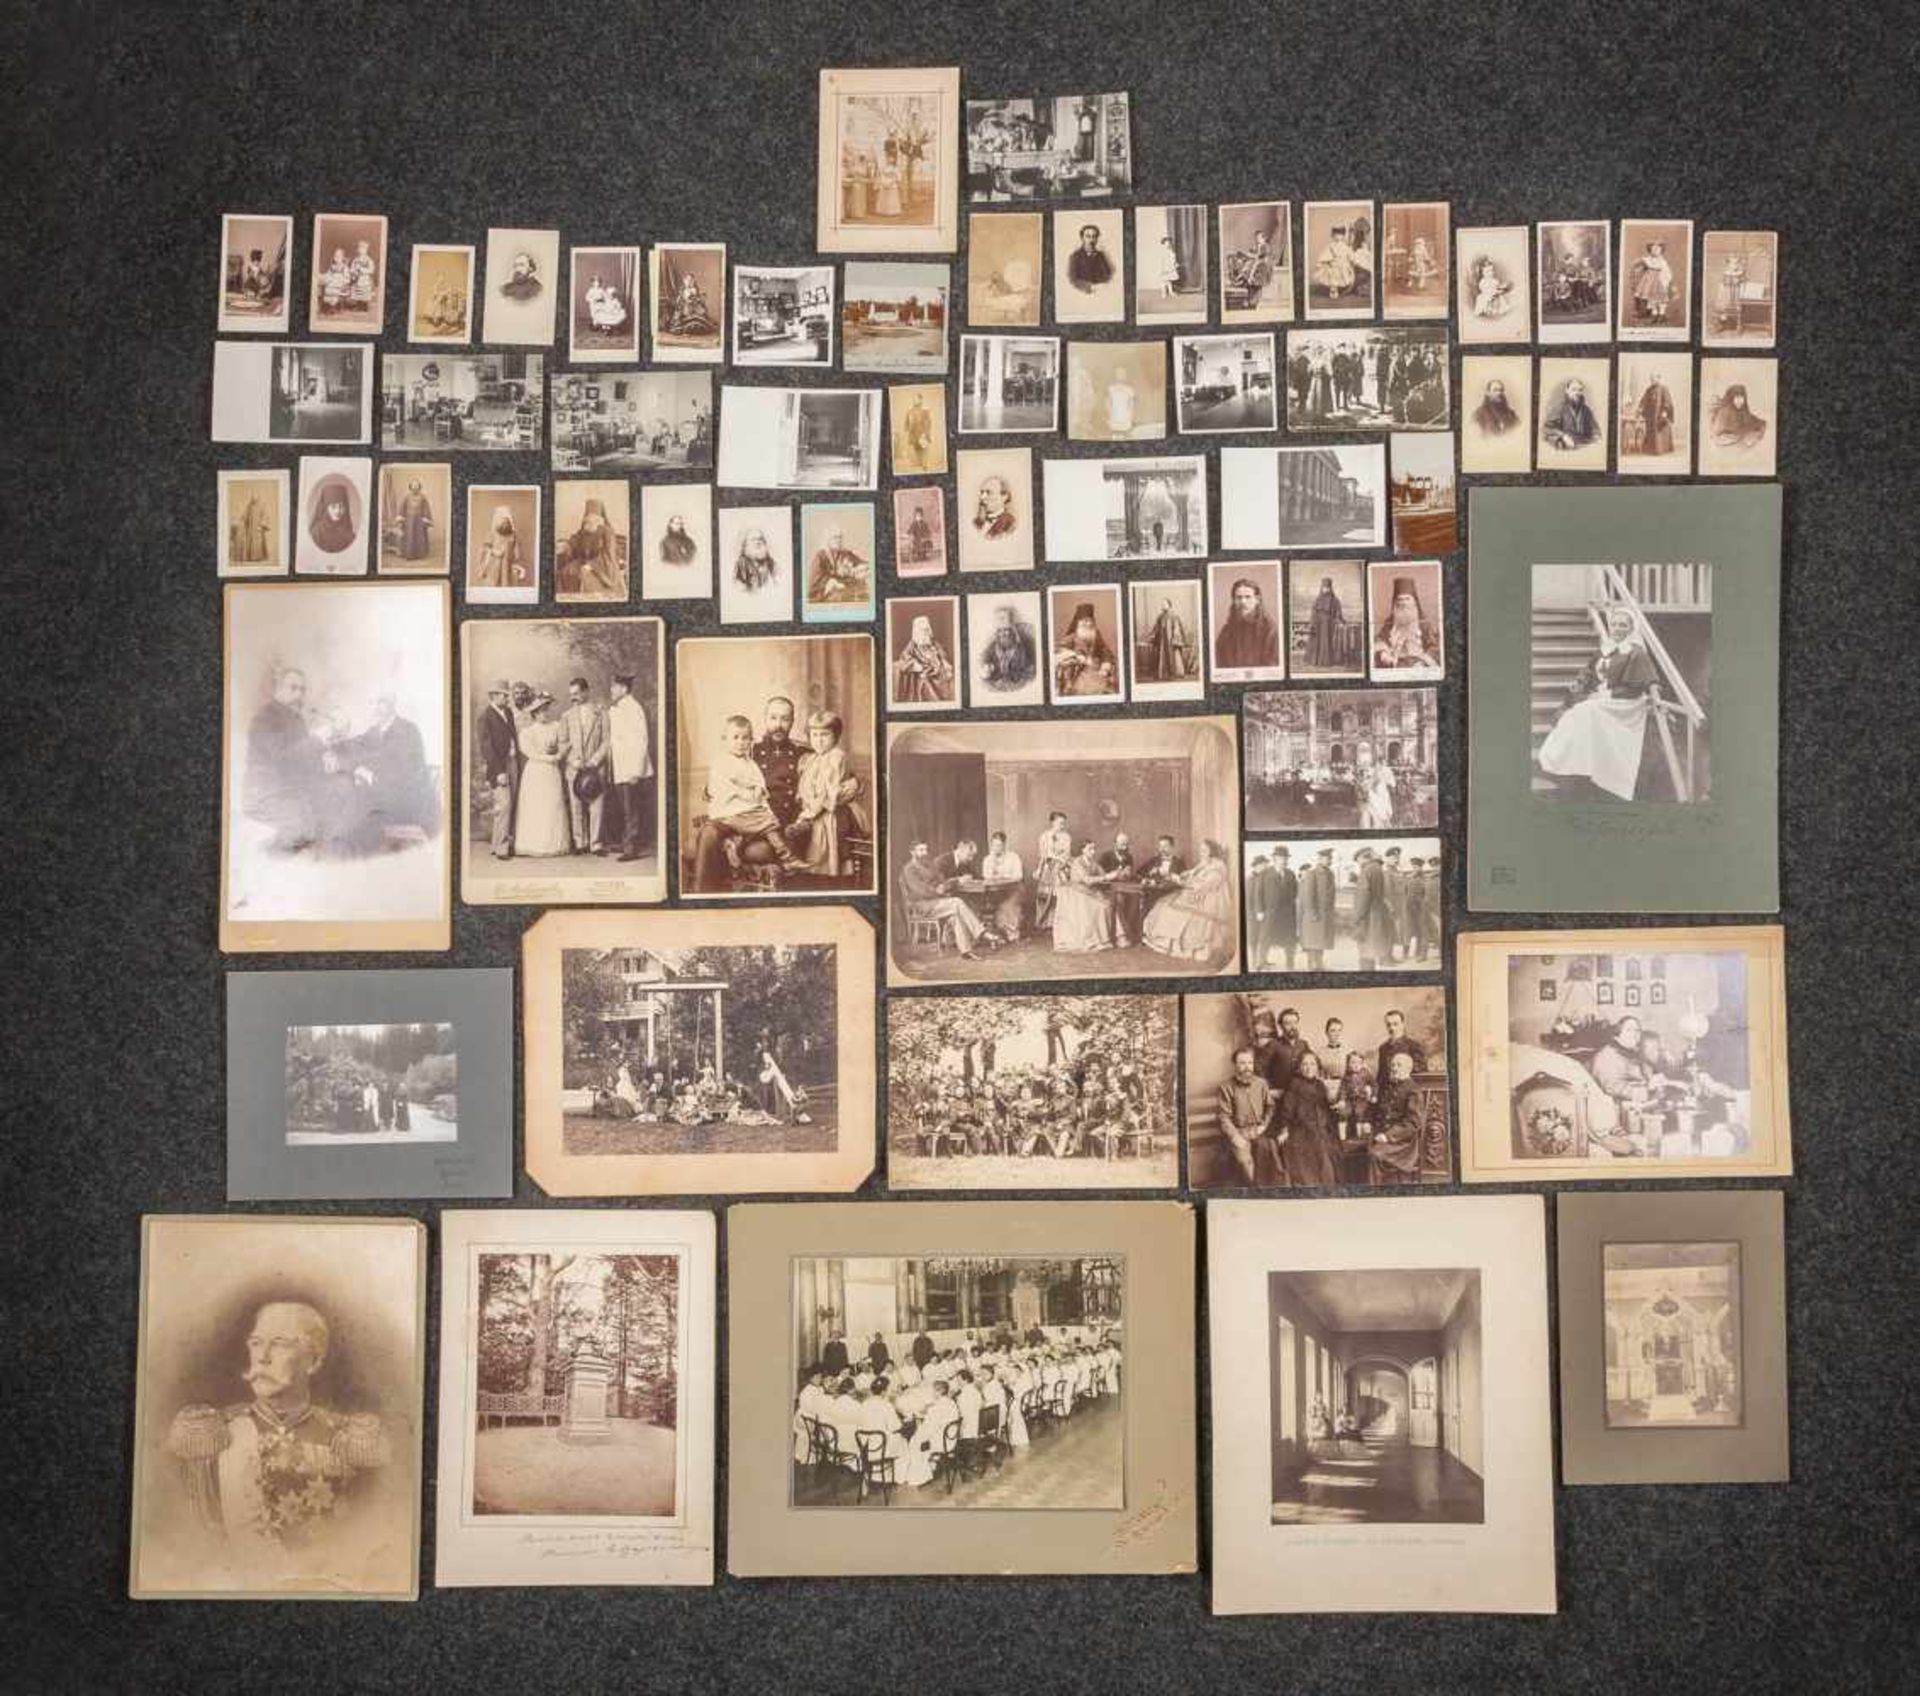 A COLLECTION OF THE HISTORICAL PHOTOGRAPHS